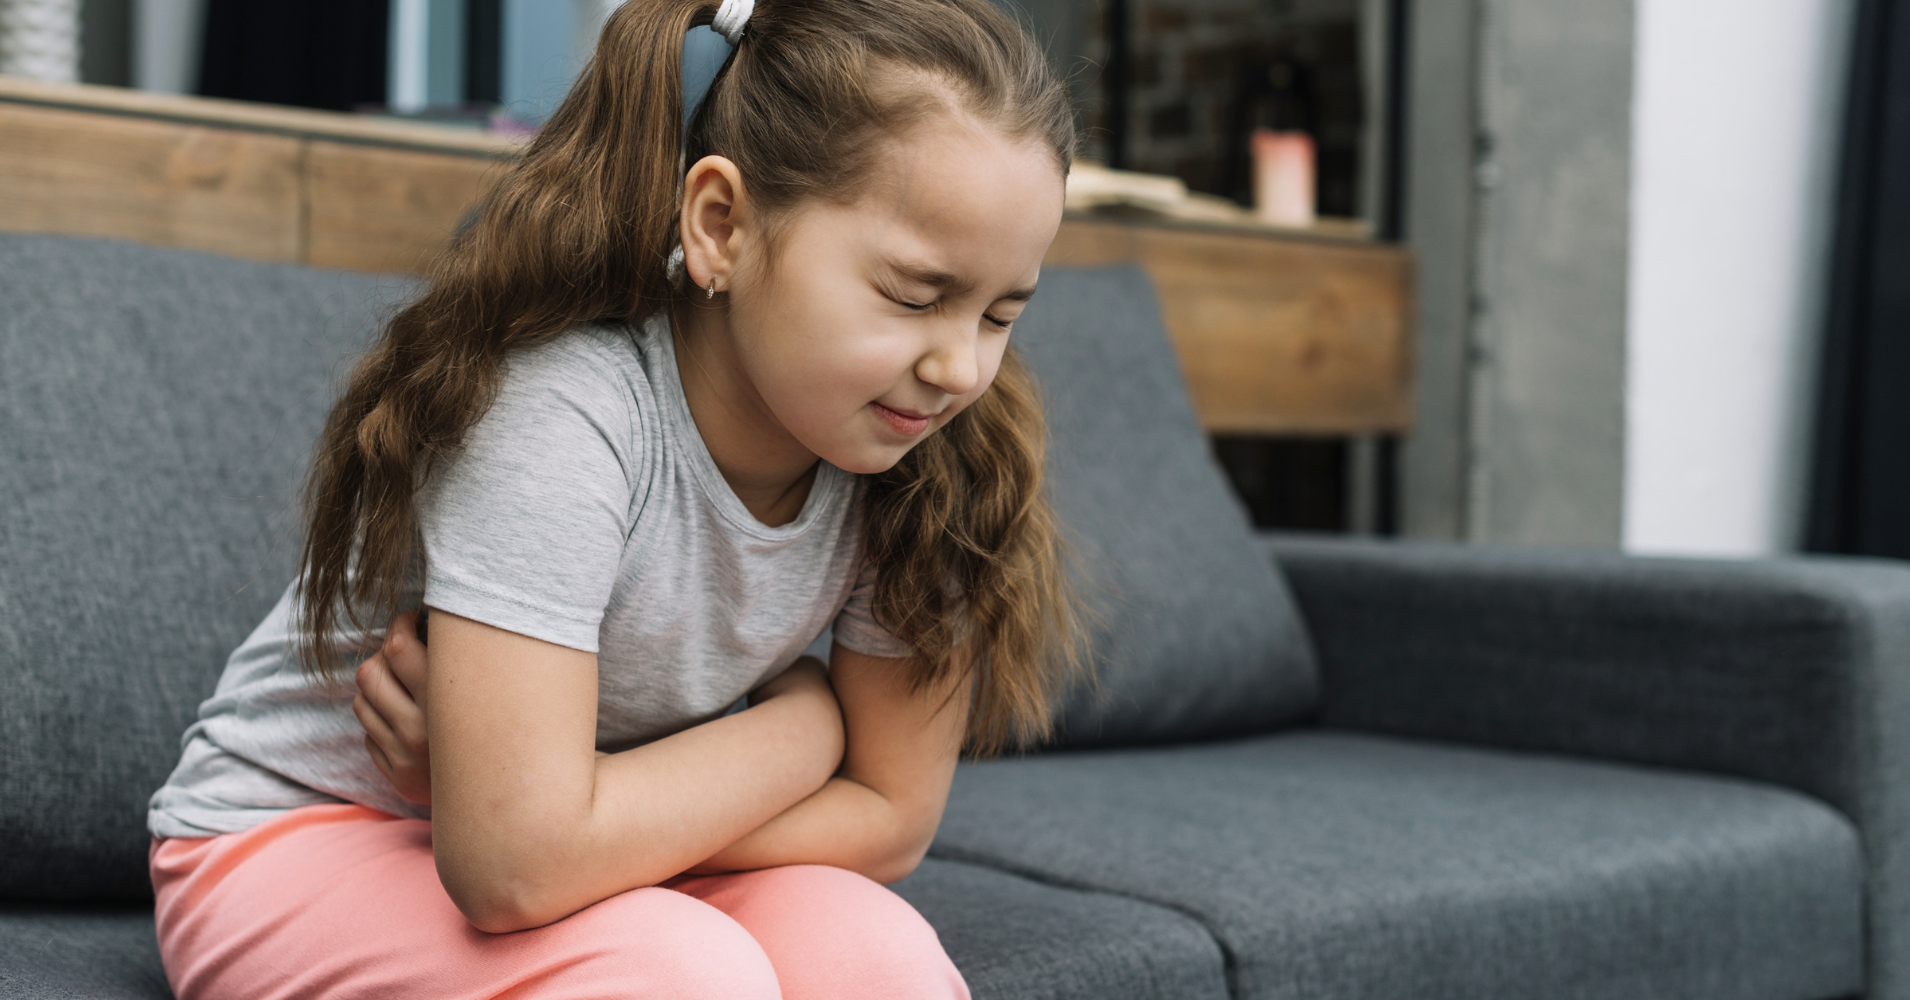 Is Your Child’s Stomach Pain an Emergency?